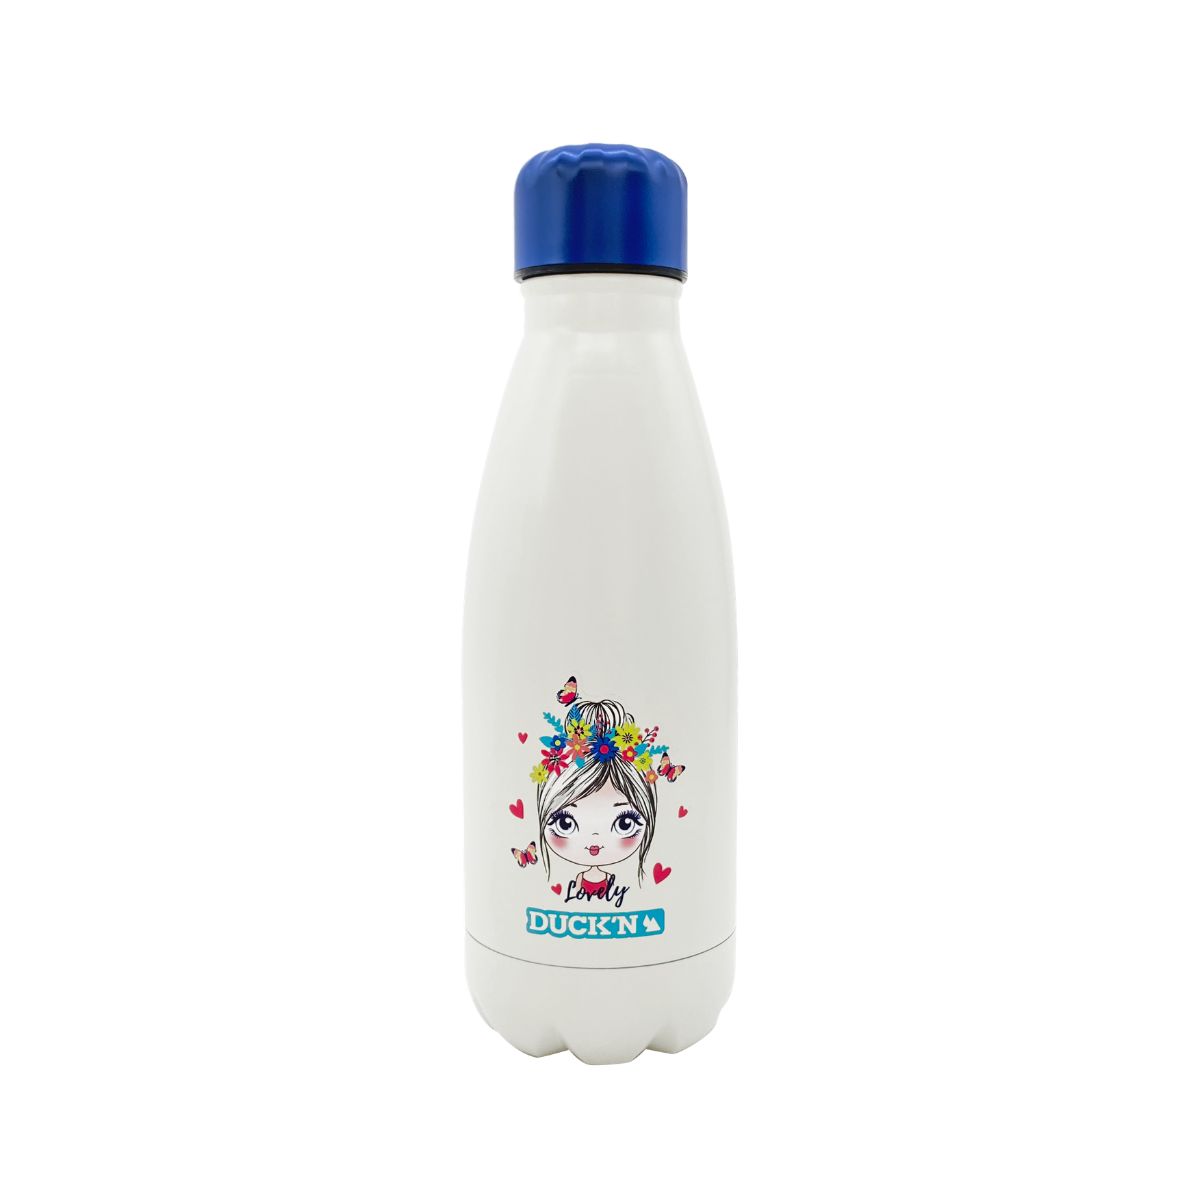 Bouteille Isotherme Duck'n 500ML Noire finition mate